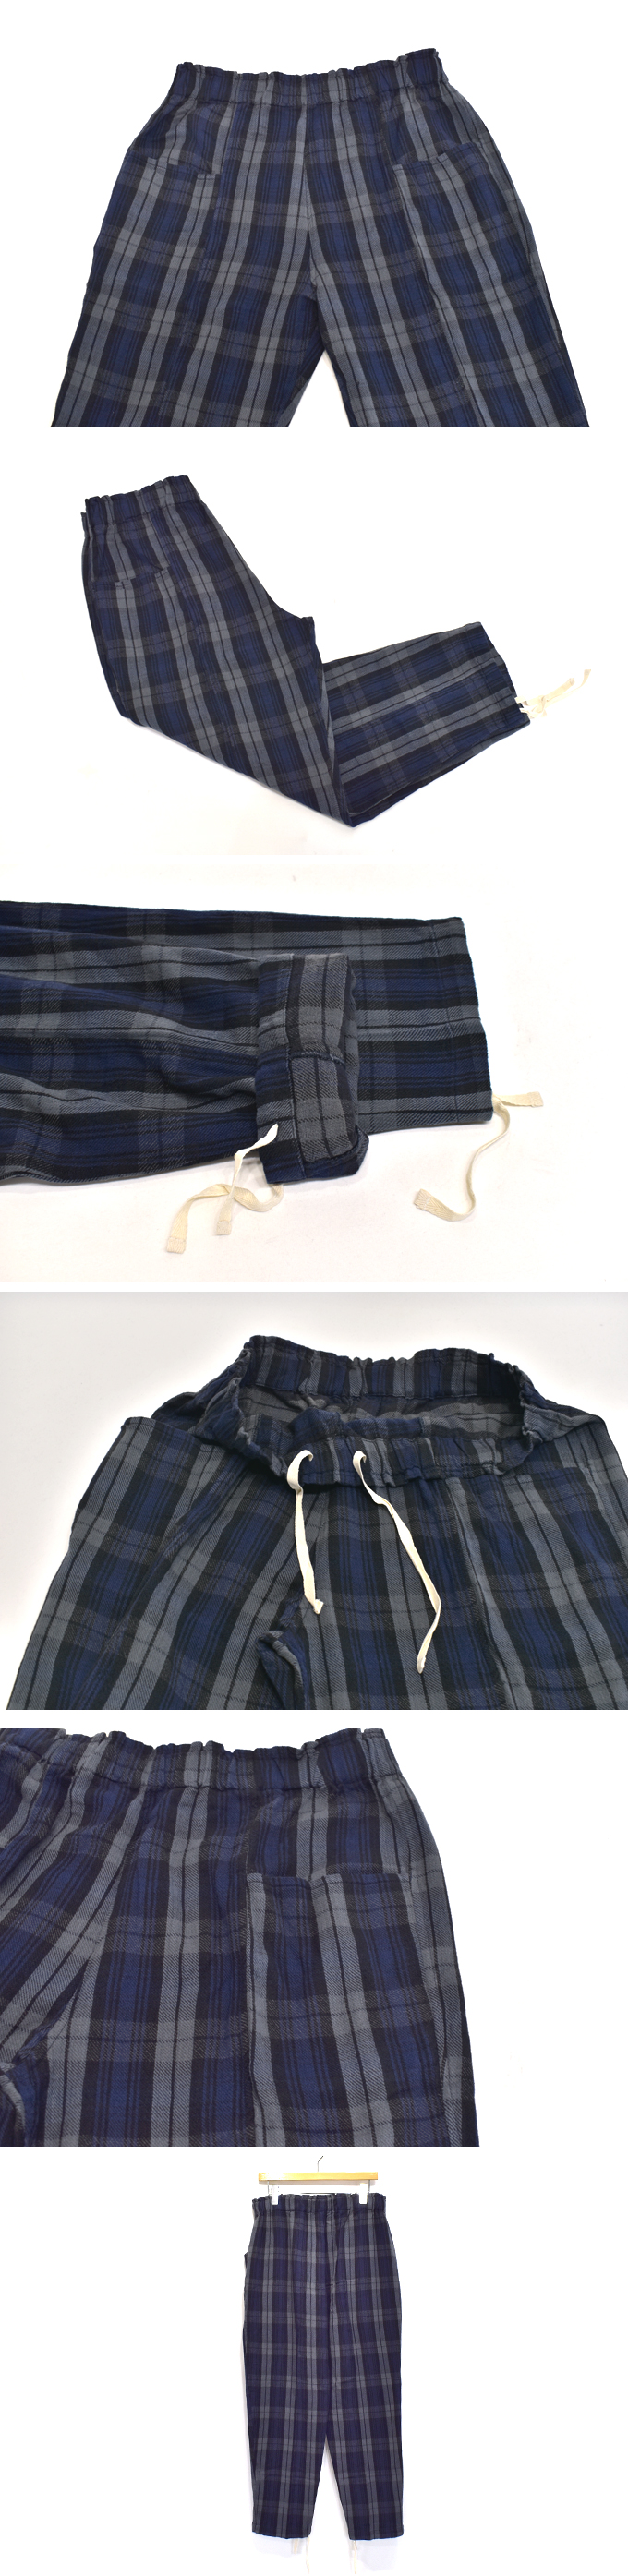 South2 West8 Army String Pant - Plaid Twill